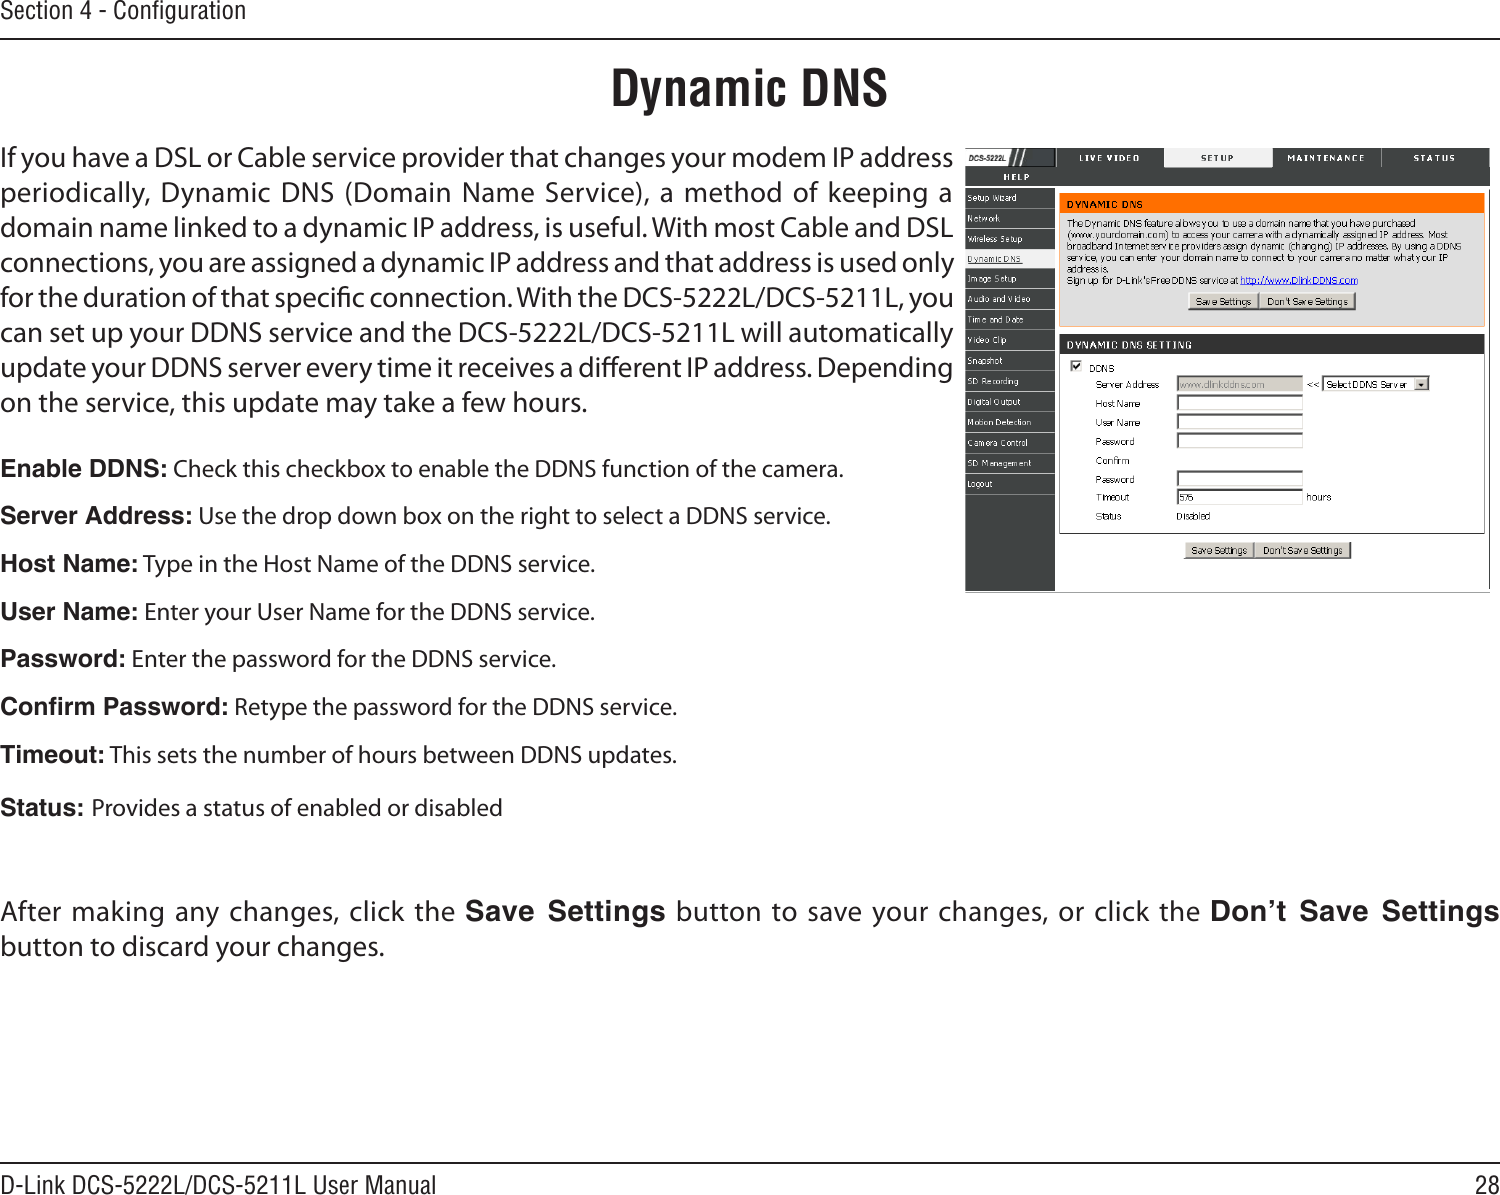 28D-Link DCS-5222L/DCS-5211L User ManualSection 4 - ConﬁgurationIf you have a DSL or Cable service provider that changes your modem IP address periodically, Dynamic DNS (Domain Name  Service), a method of keeping a domain name linked to a dynamic IP address, is useful. With most Cable and DSL connections, you are assigned a dynamic IP address and that address is used only for the duration of that specic connection. With the DCS-5222L/DCS-5211L, you can set up your DDNS service and the DCS-5222L/DCS-5211L will automatically update your DDNS server every time it receives a dierent IP address. Depending on the service, this update may take a few hours.Enable DDNS: Check this checkbox to enable the DDNS function of the camera.Server Address: Use the drop down box on the right to select a DDNS service.Host Name: Type in the Host Name of the DDNS service.User Name: Enter your User Name for the DDNS service.Password: Enter the password for the DDNS service.Conrm Password: Retype the password for the DDNS service.Timeout: This sets the number of hours between DDNS updates.Status: Provides a status of enabled or disabledAfter making  any changes, click the Save  Settings button to save  your changes, or click the Don’t  Save  Settings button to discard your changes.Dynamic DNS